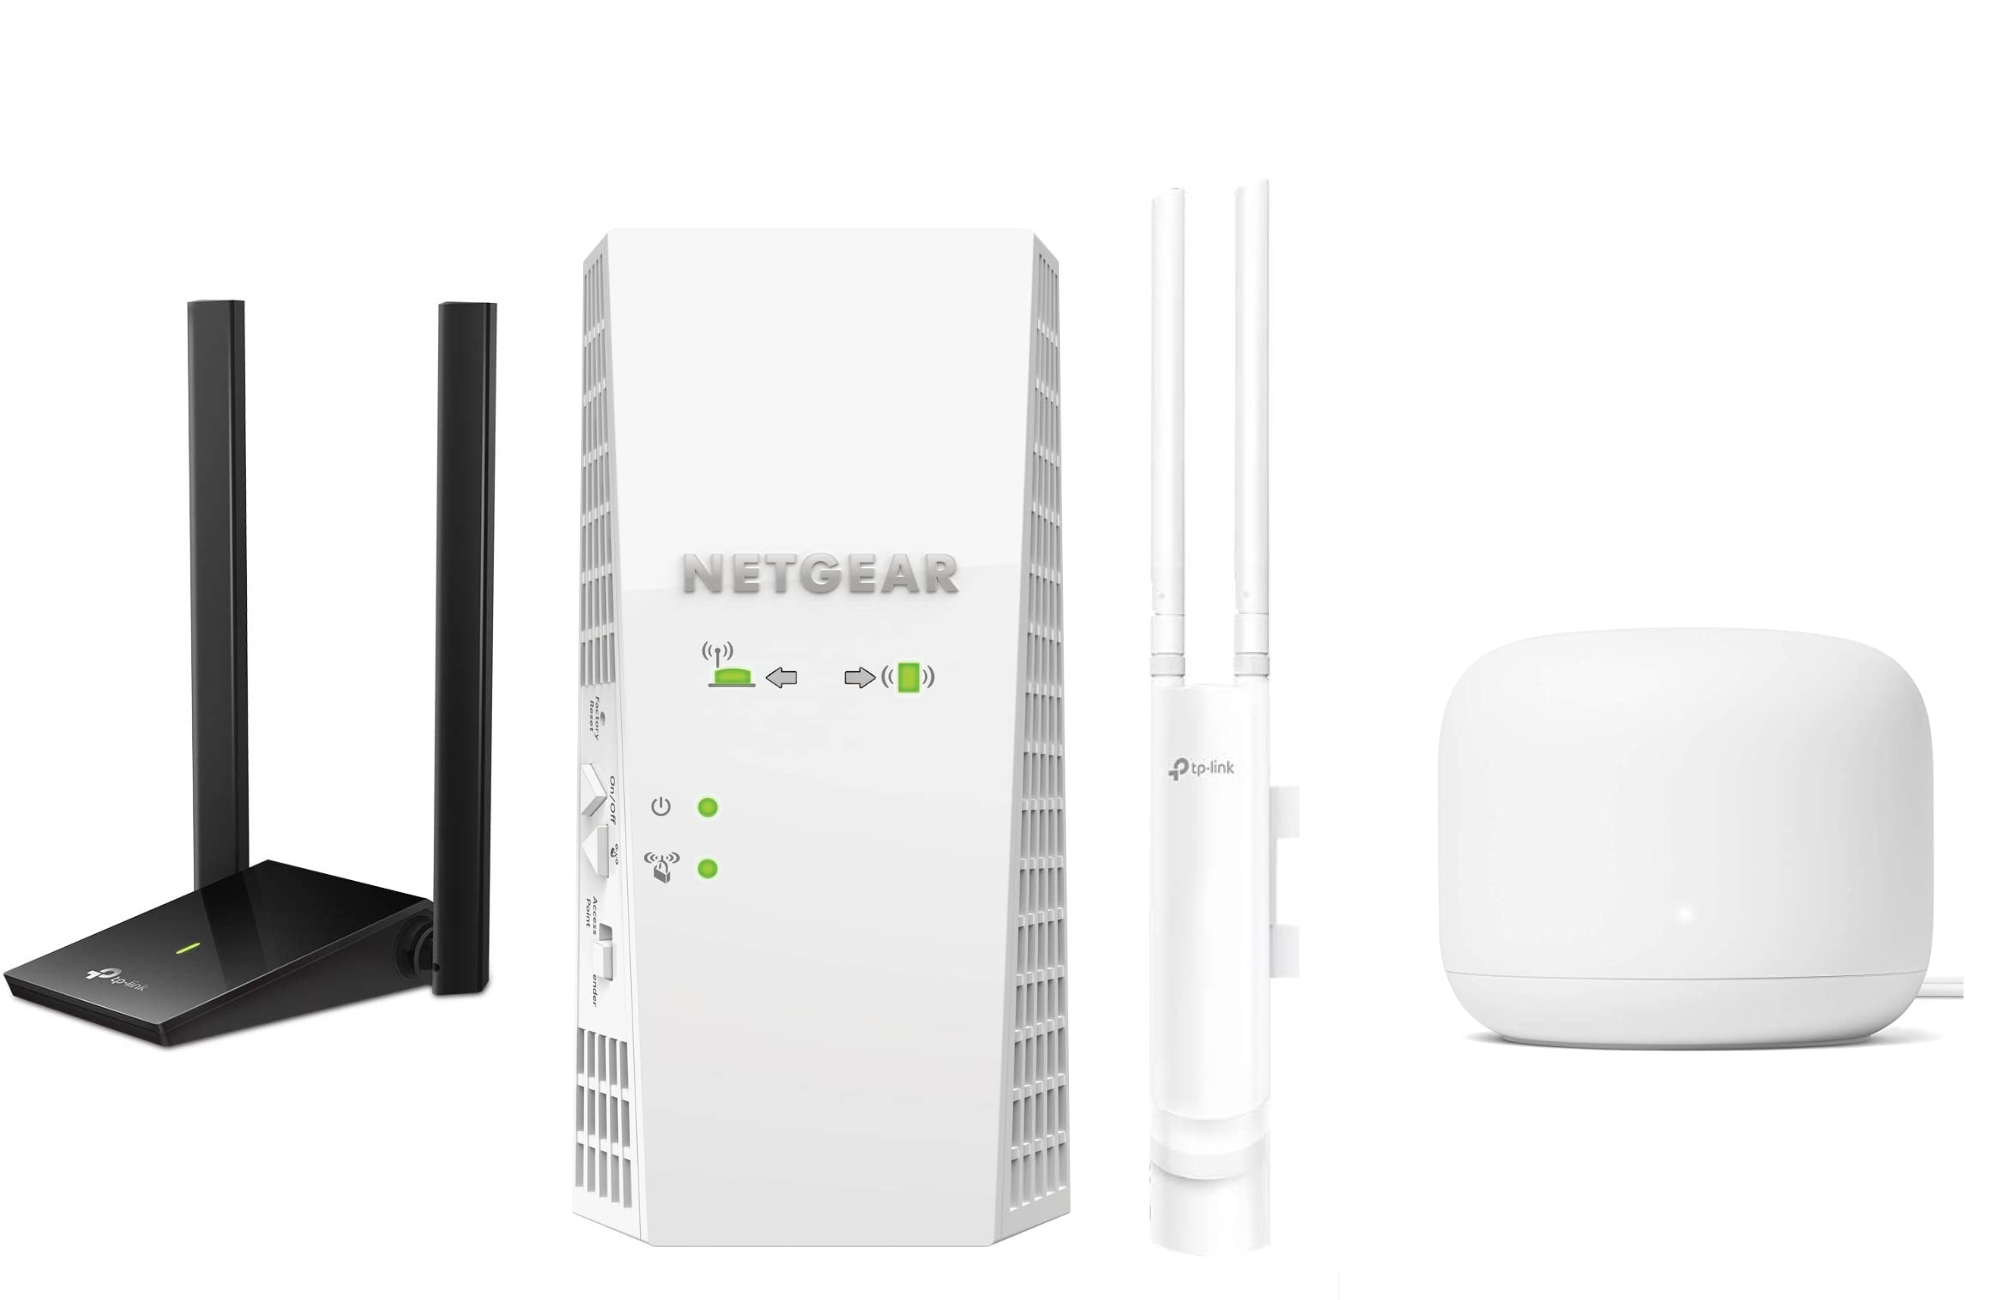 Is a wifi booster/repeater/extender a good idea in terms of